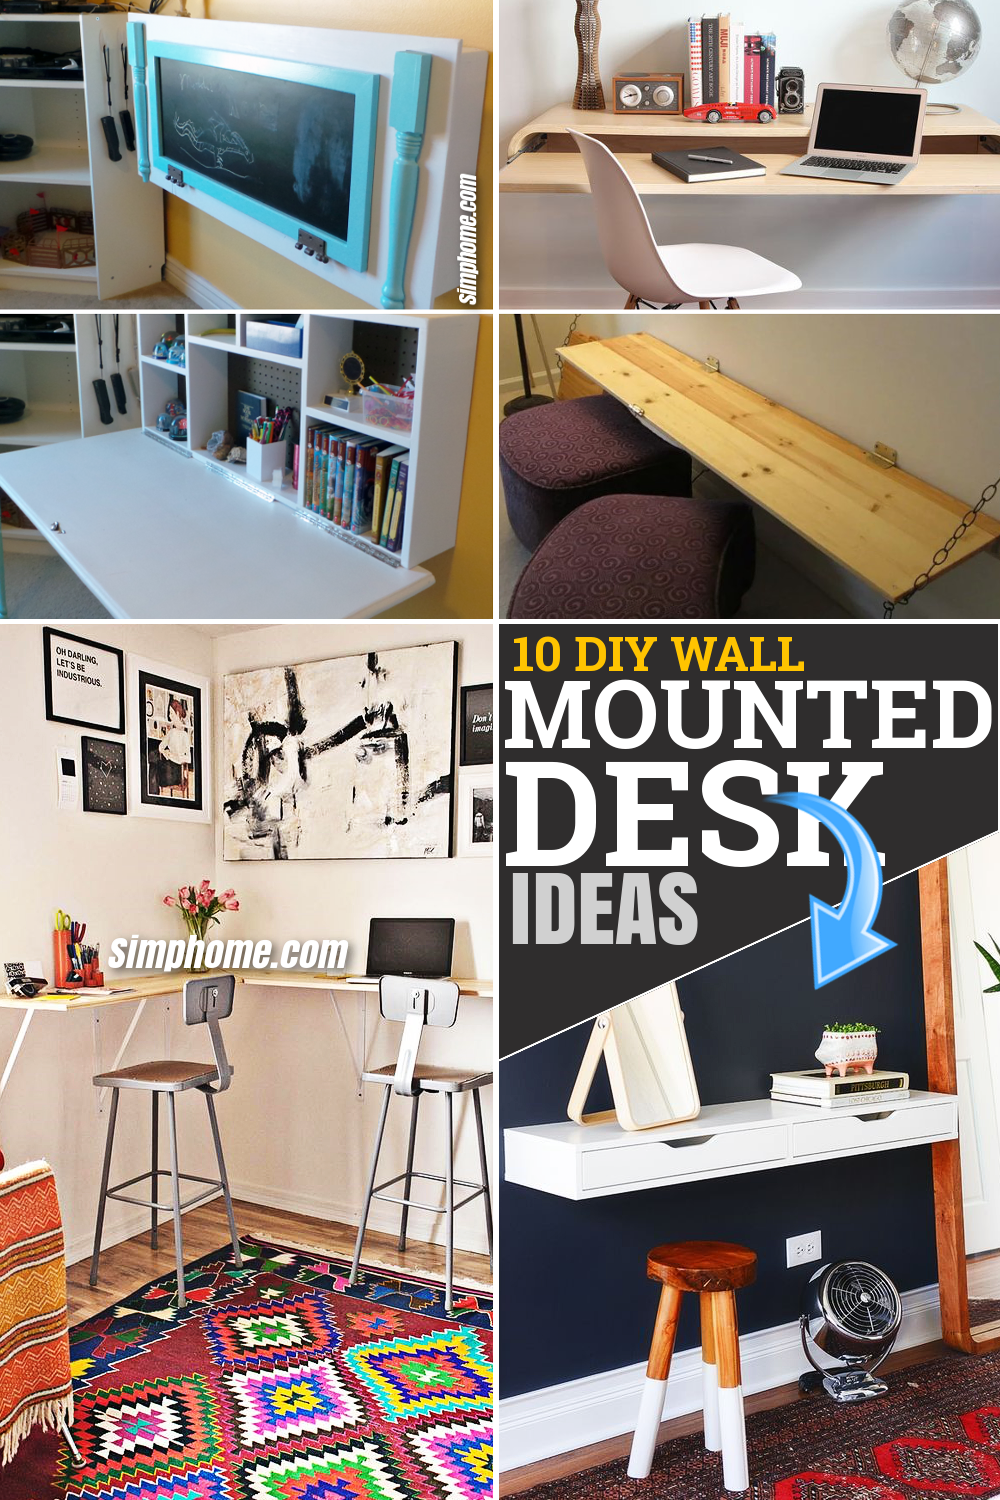 10 DIY Wall Mounted Desk Ideas for a Perfect Storage Solution via Simphome.com Featured Pinterest Image